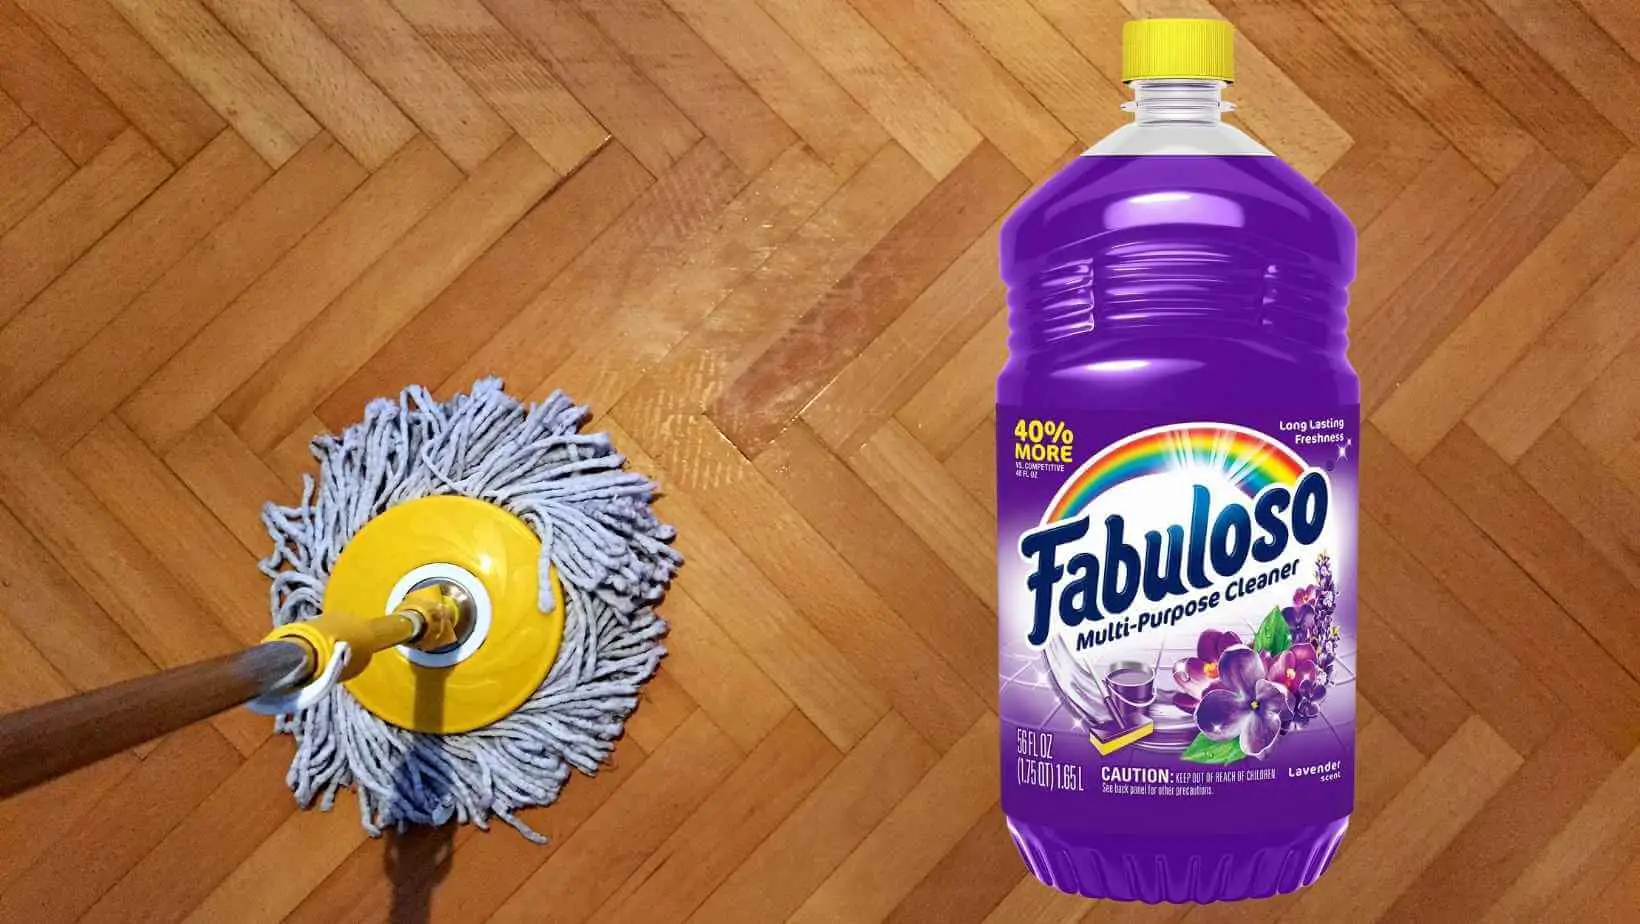 Can You Use Fabuloso on Wood Floors